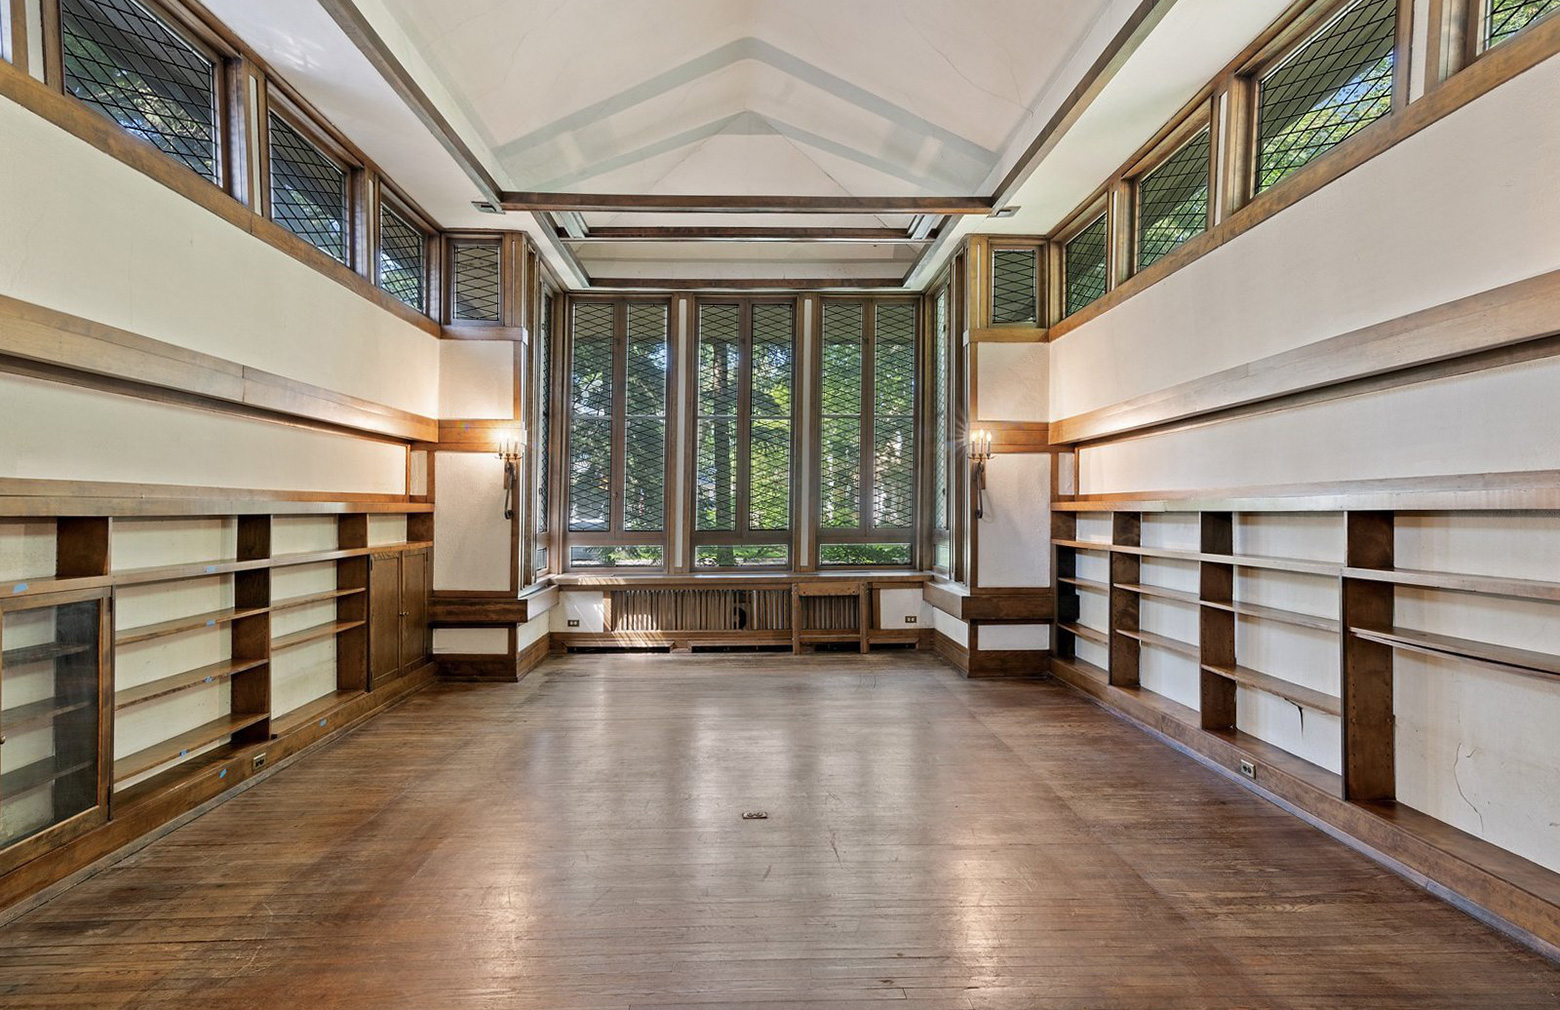 A Library Like Frank Lloyd Wright Home Is For Sale In